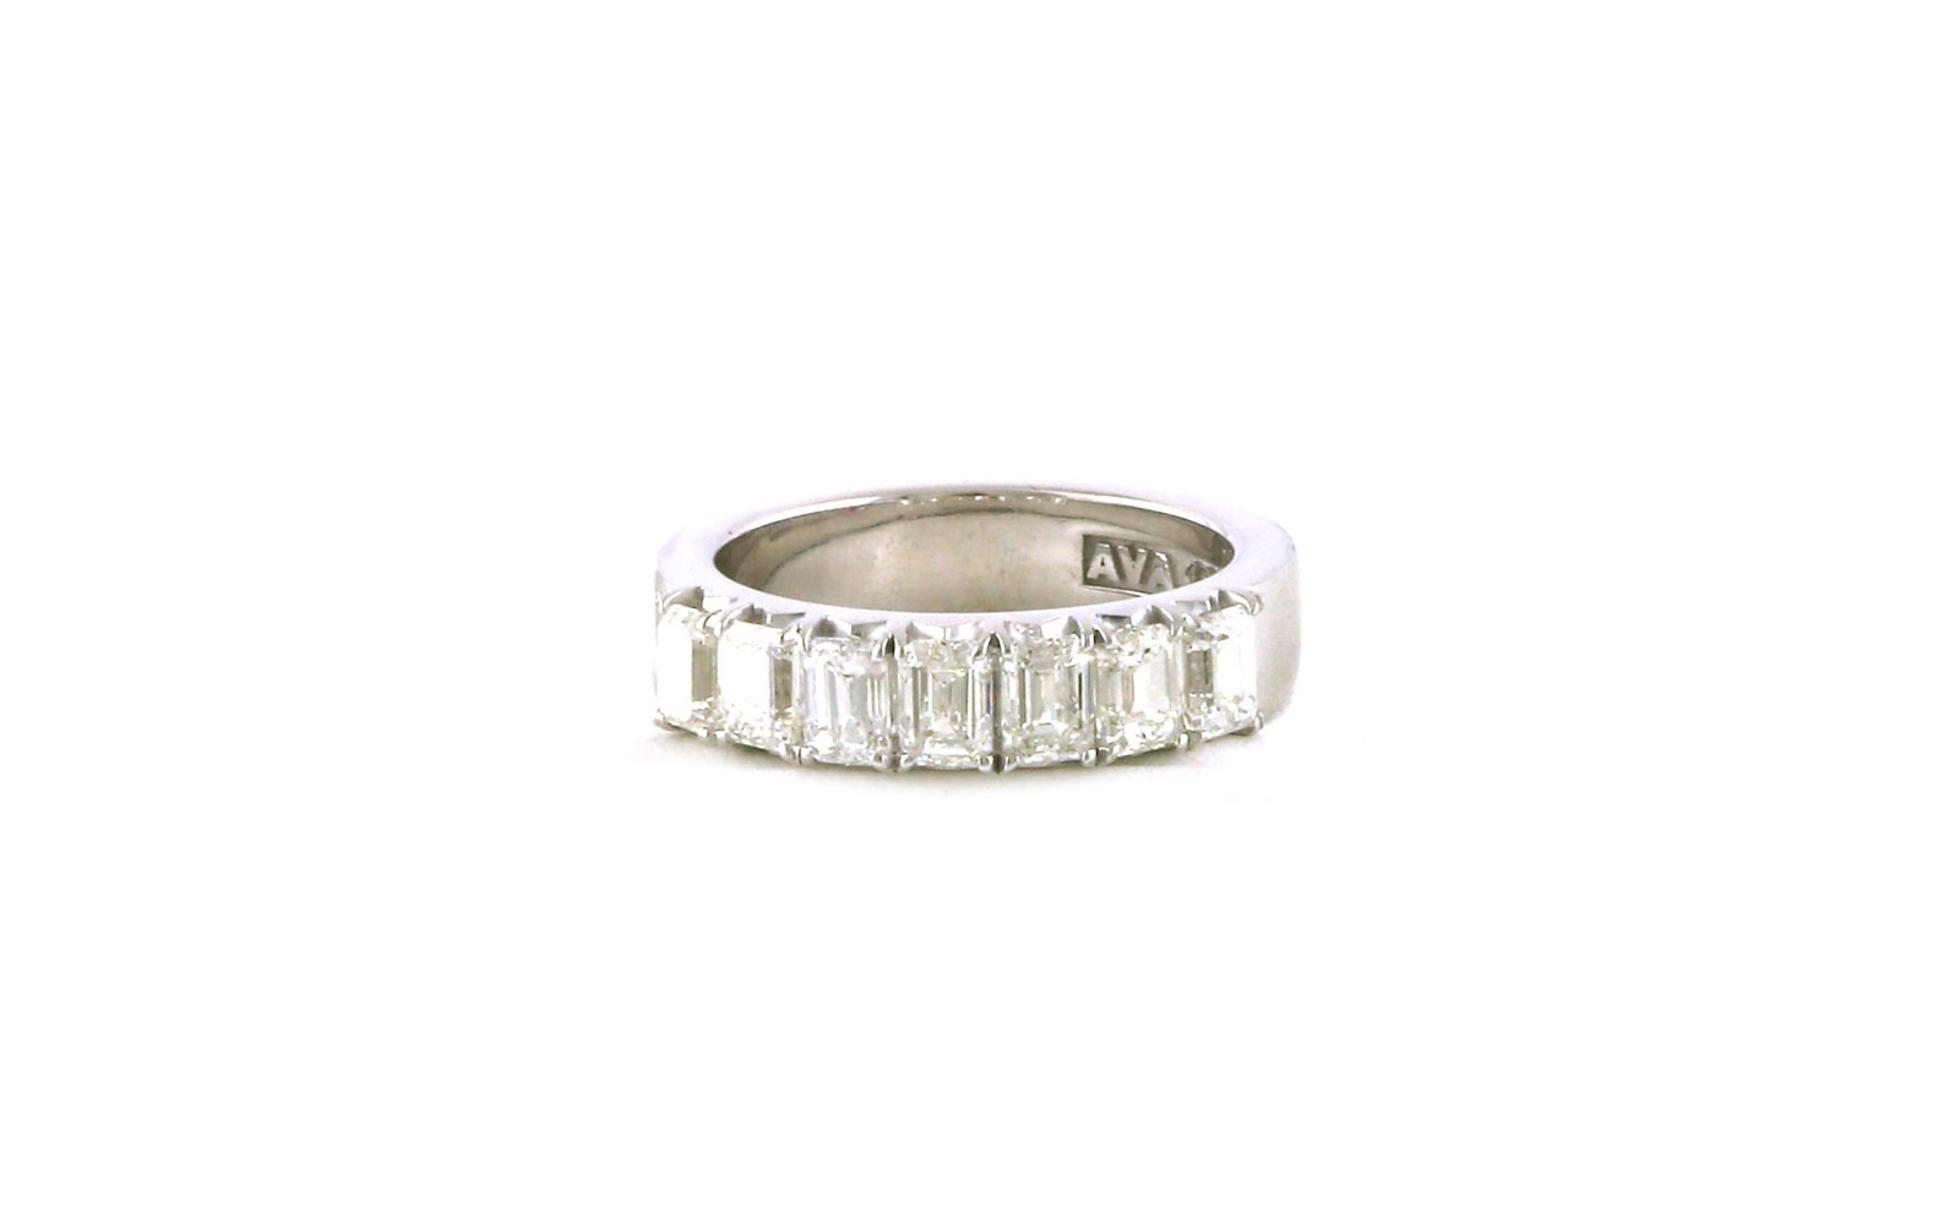 7-Stone Emerald-cut Diamond Wedding Band in White Gold (2.15cts TWT)